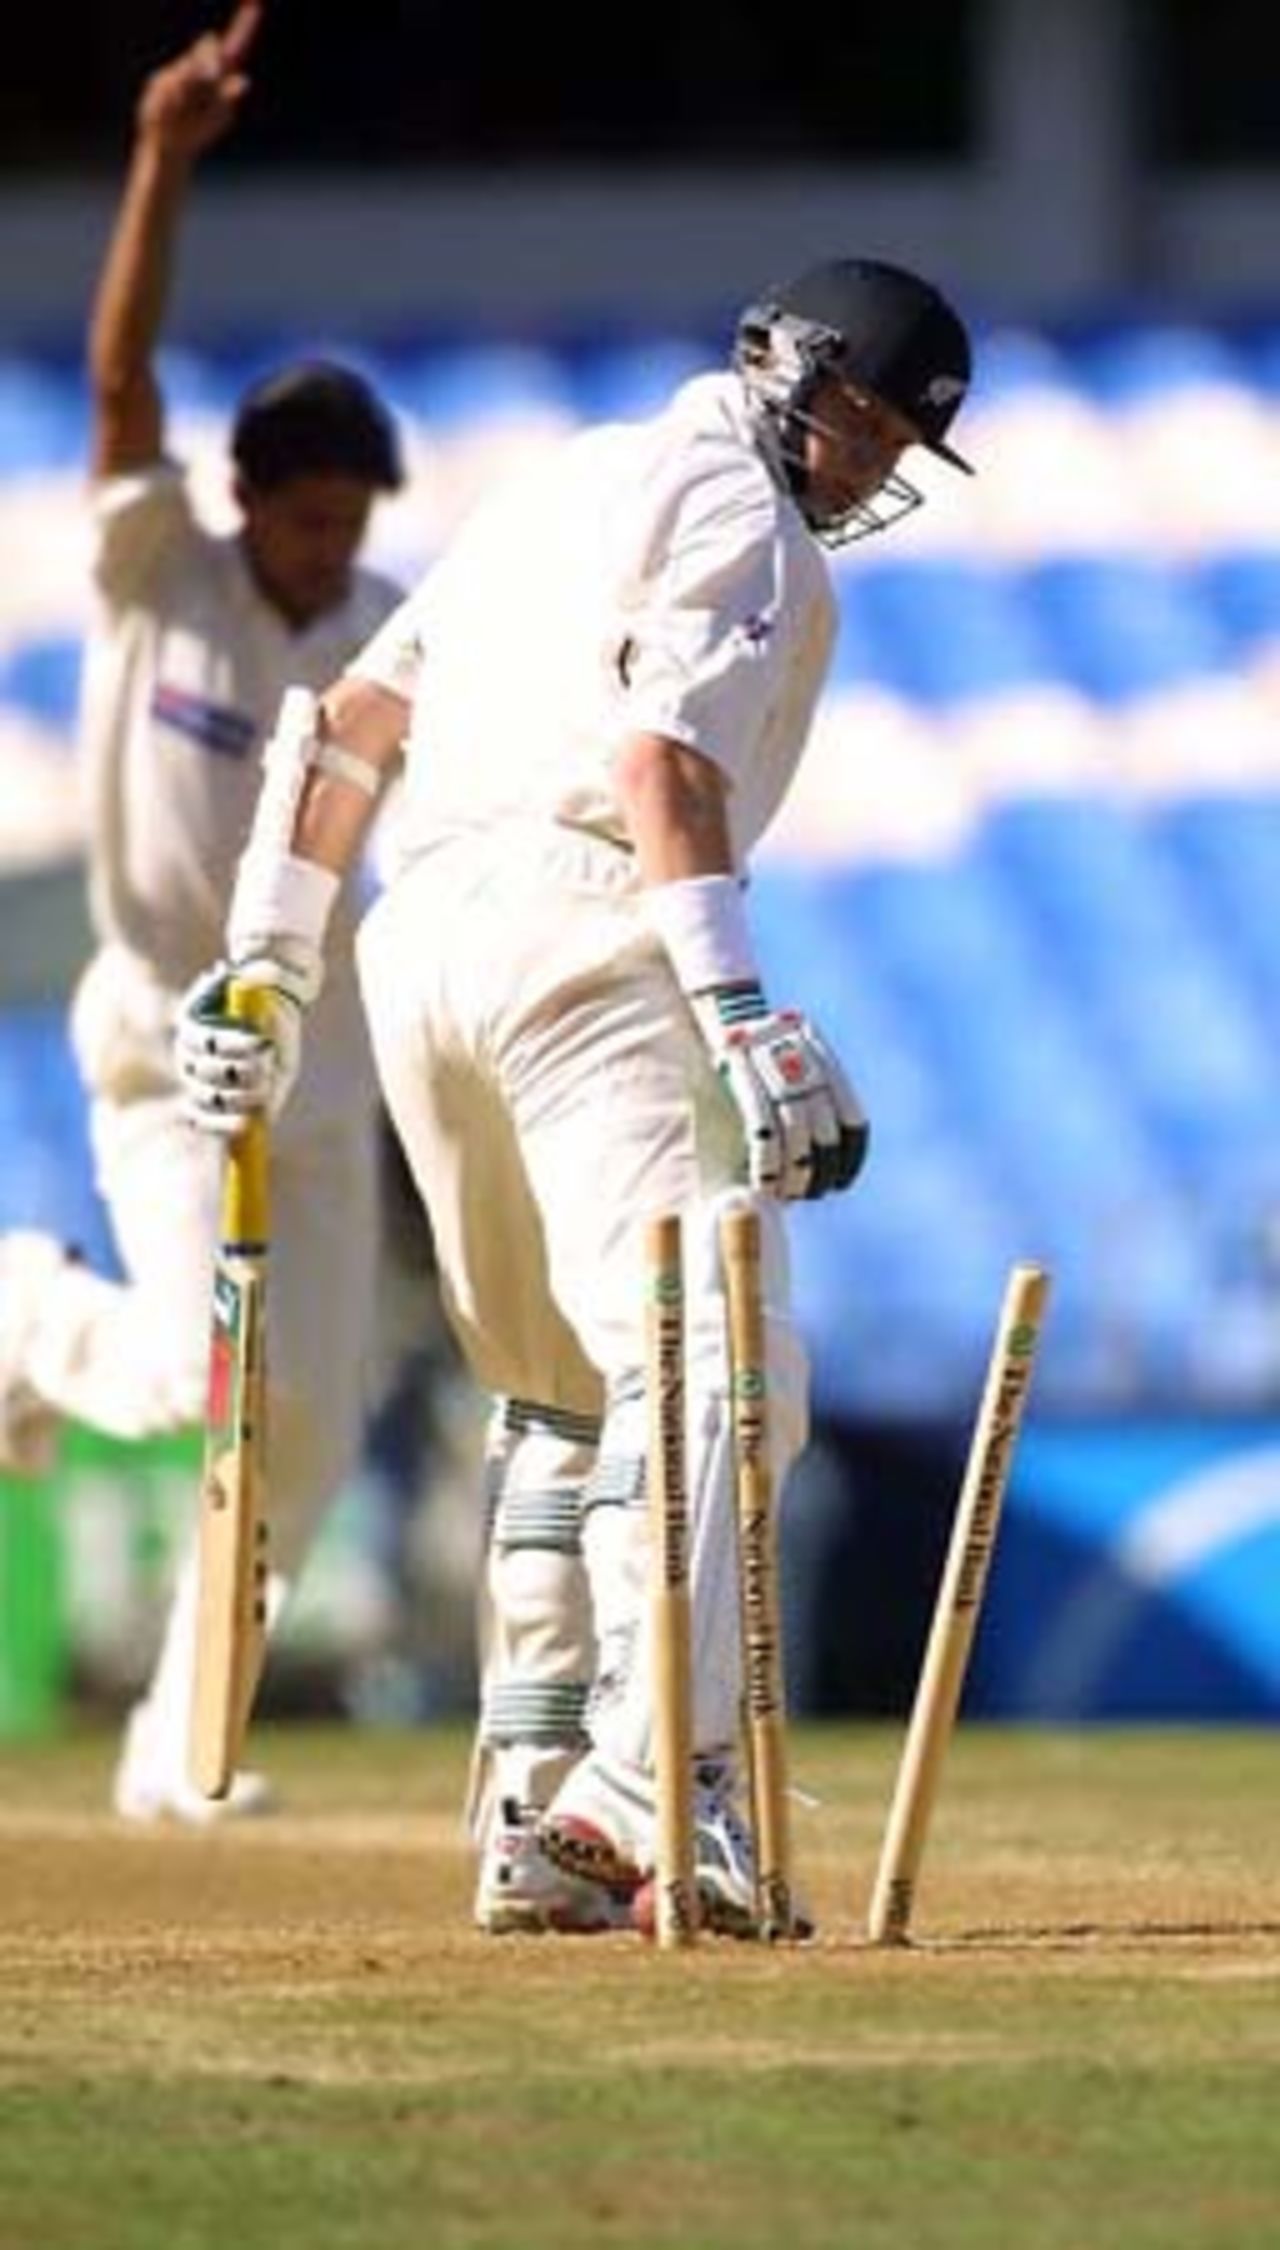 New Zealand nightwatchman Paul Wiseman looks back to see the stumps knocked back after being bowled by Pakistan fast bowler Mohammad Sami for eight. 1st Test: New Zealand v Pakistan at Eden Park, Auckland, 8-12 March 2001 (12 March 2001).